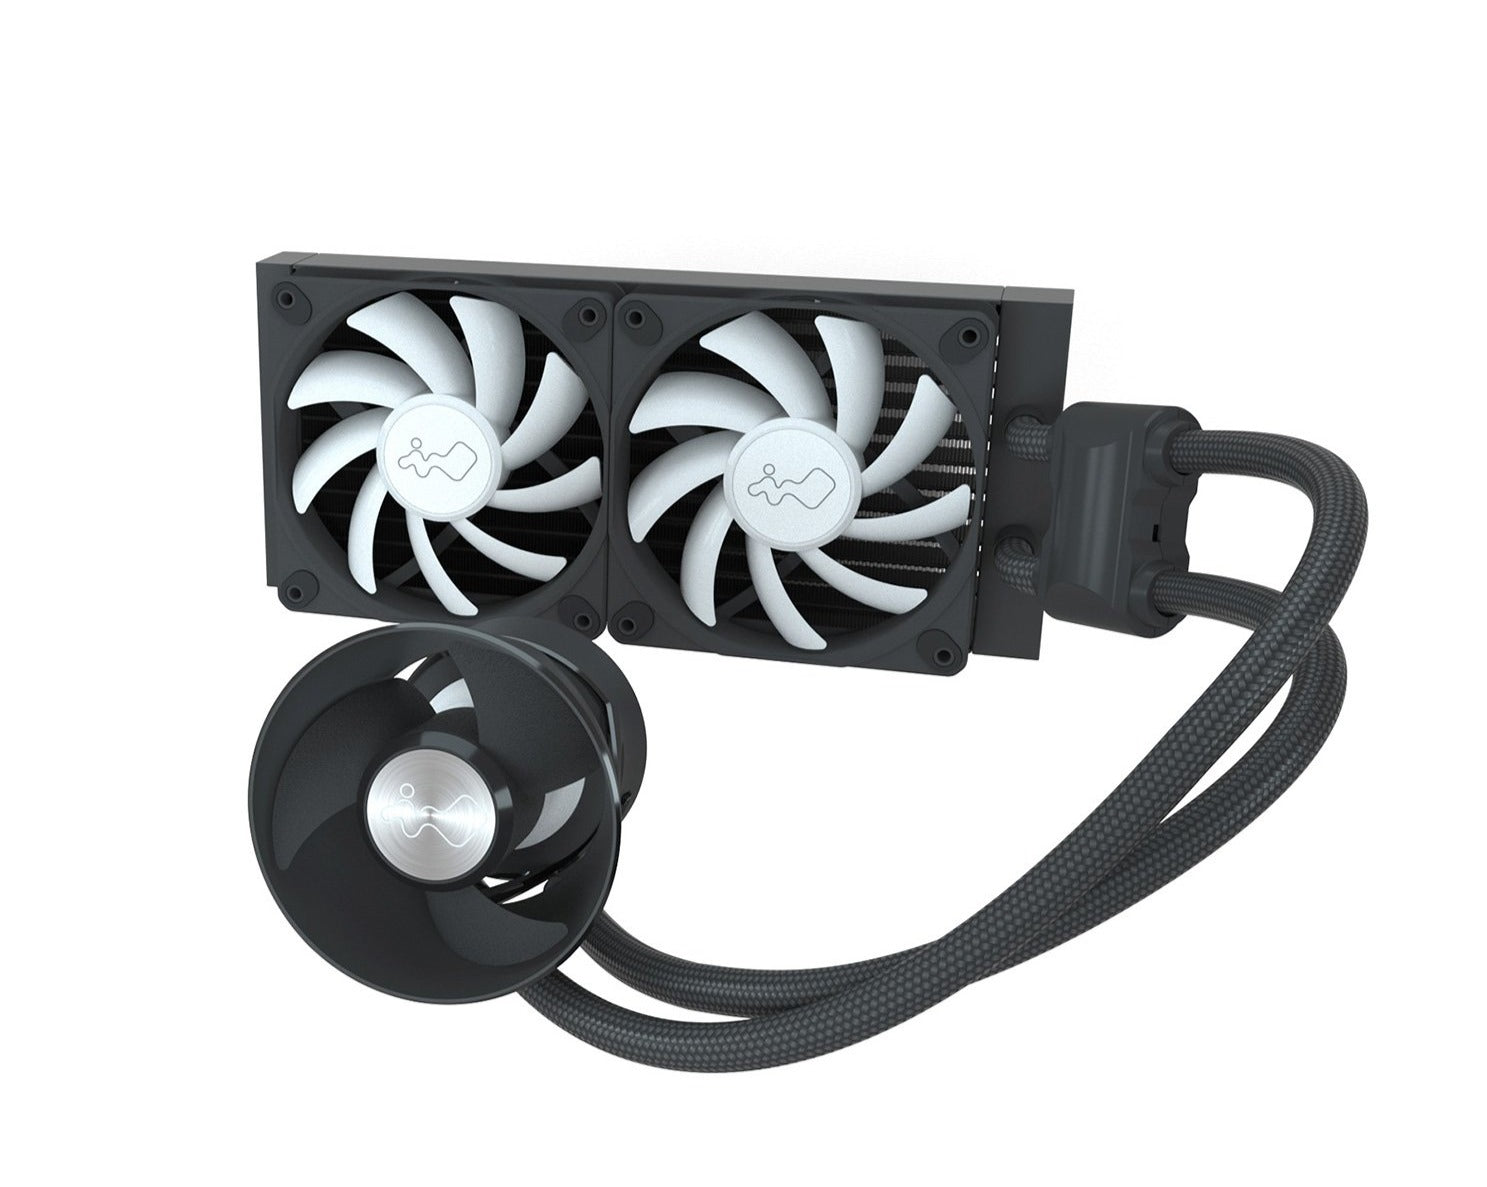 blad prop føderation BR24 (240mm AIO with InWin UMA Cooling Design) – InWinStore